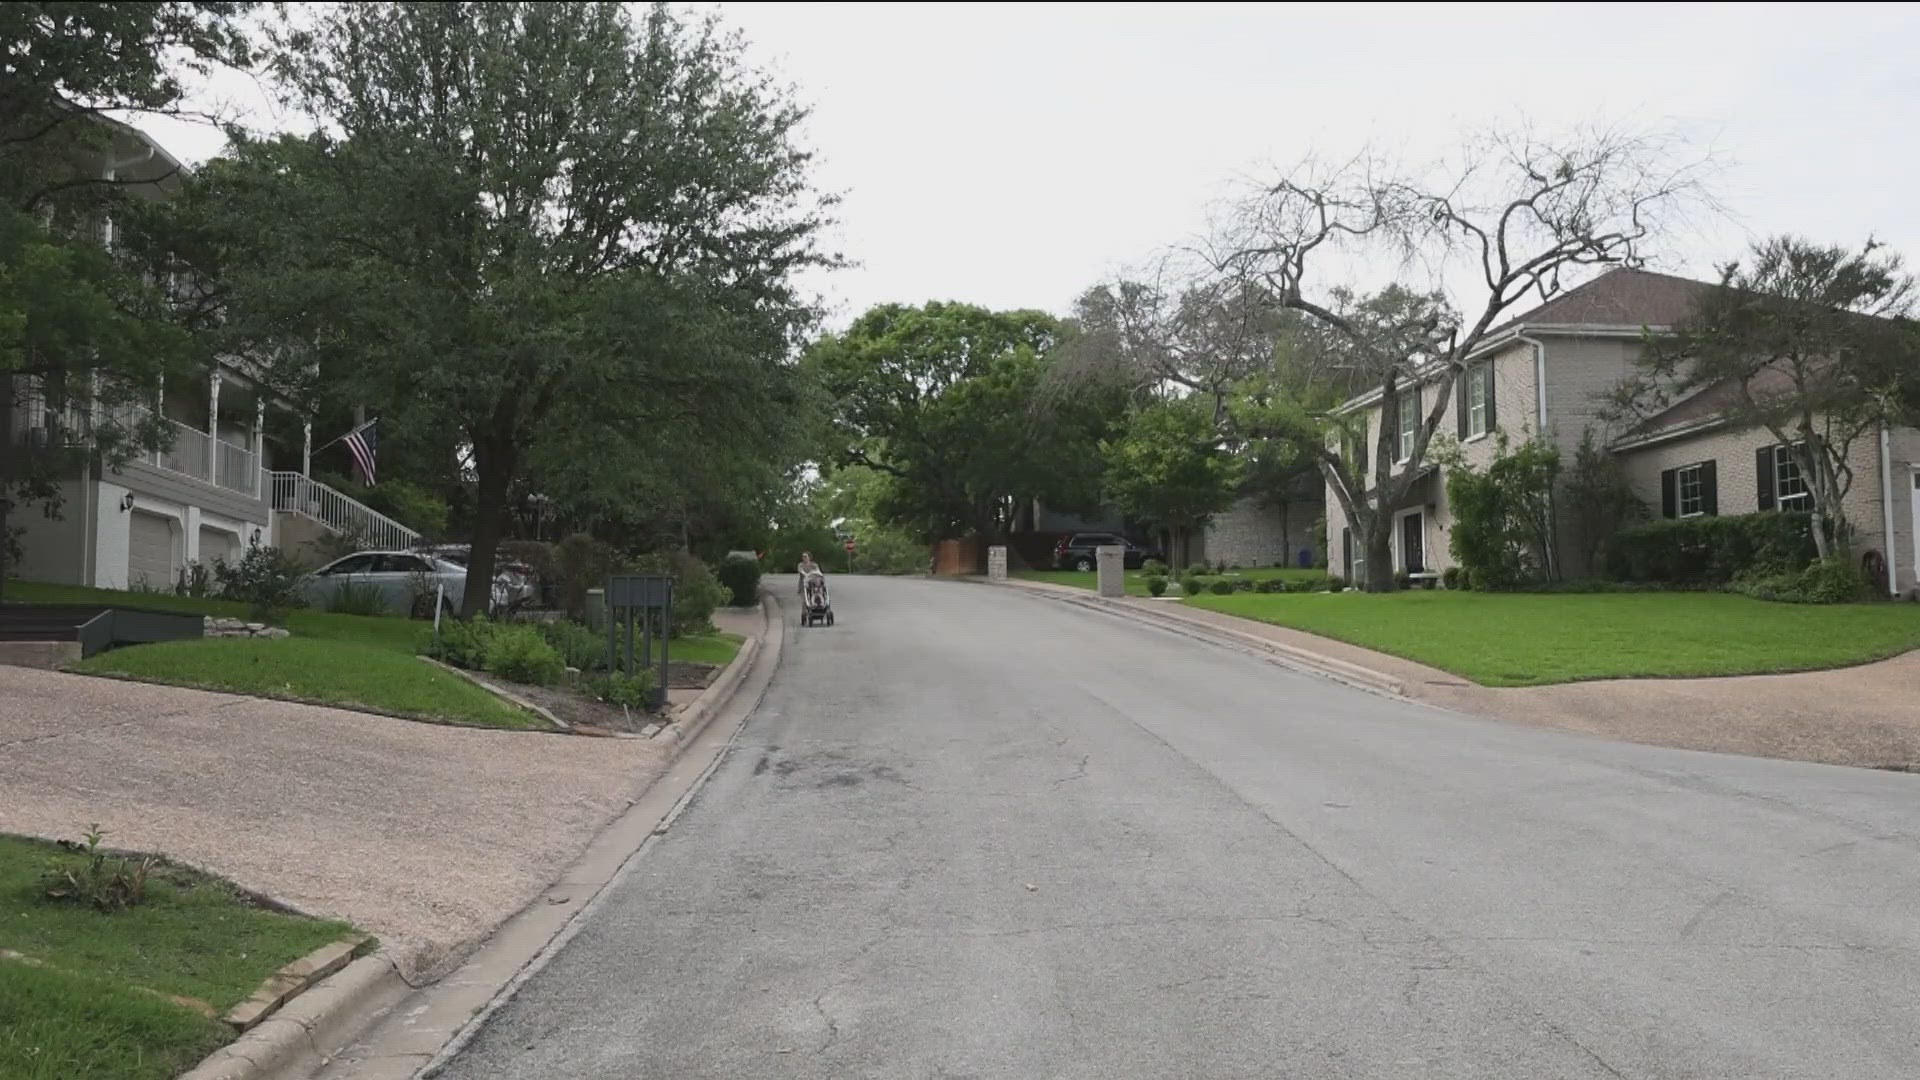 Homeowners have just a few days left to protest property appraisals. KVUE's Isabella Basco explains how the process works.